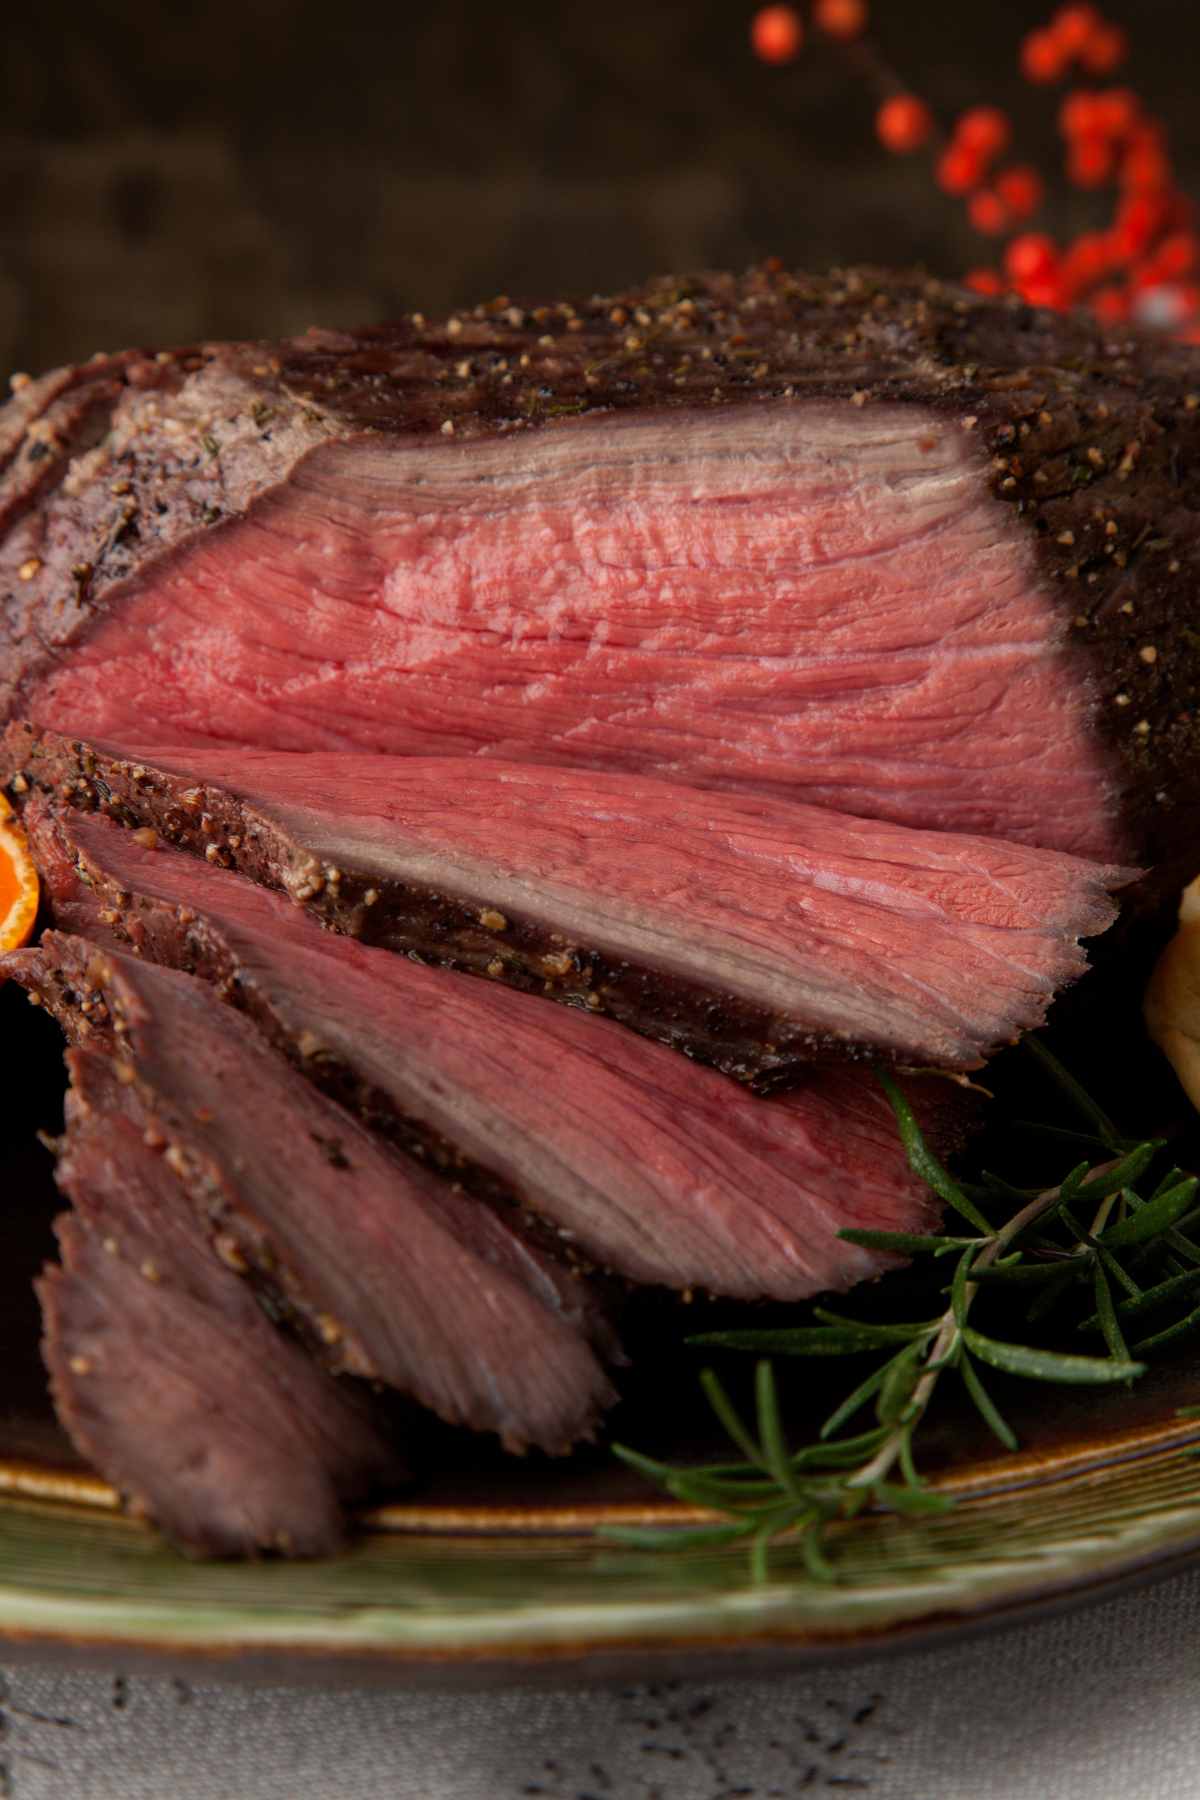 When you’re preparing beef at home, it’s important to pay attention to the internal temp. Keep reading to find out the best Beef Internal Temp, as well as the right technique for measuring the temperature of the steak, beef ribs, ground beef, and more!